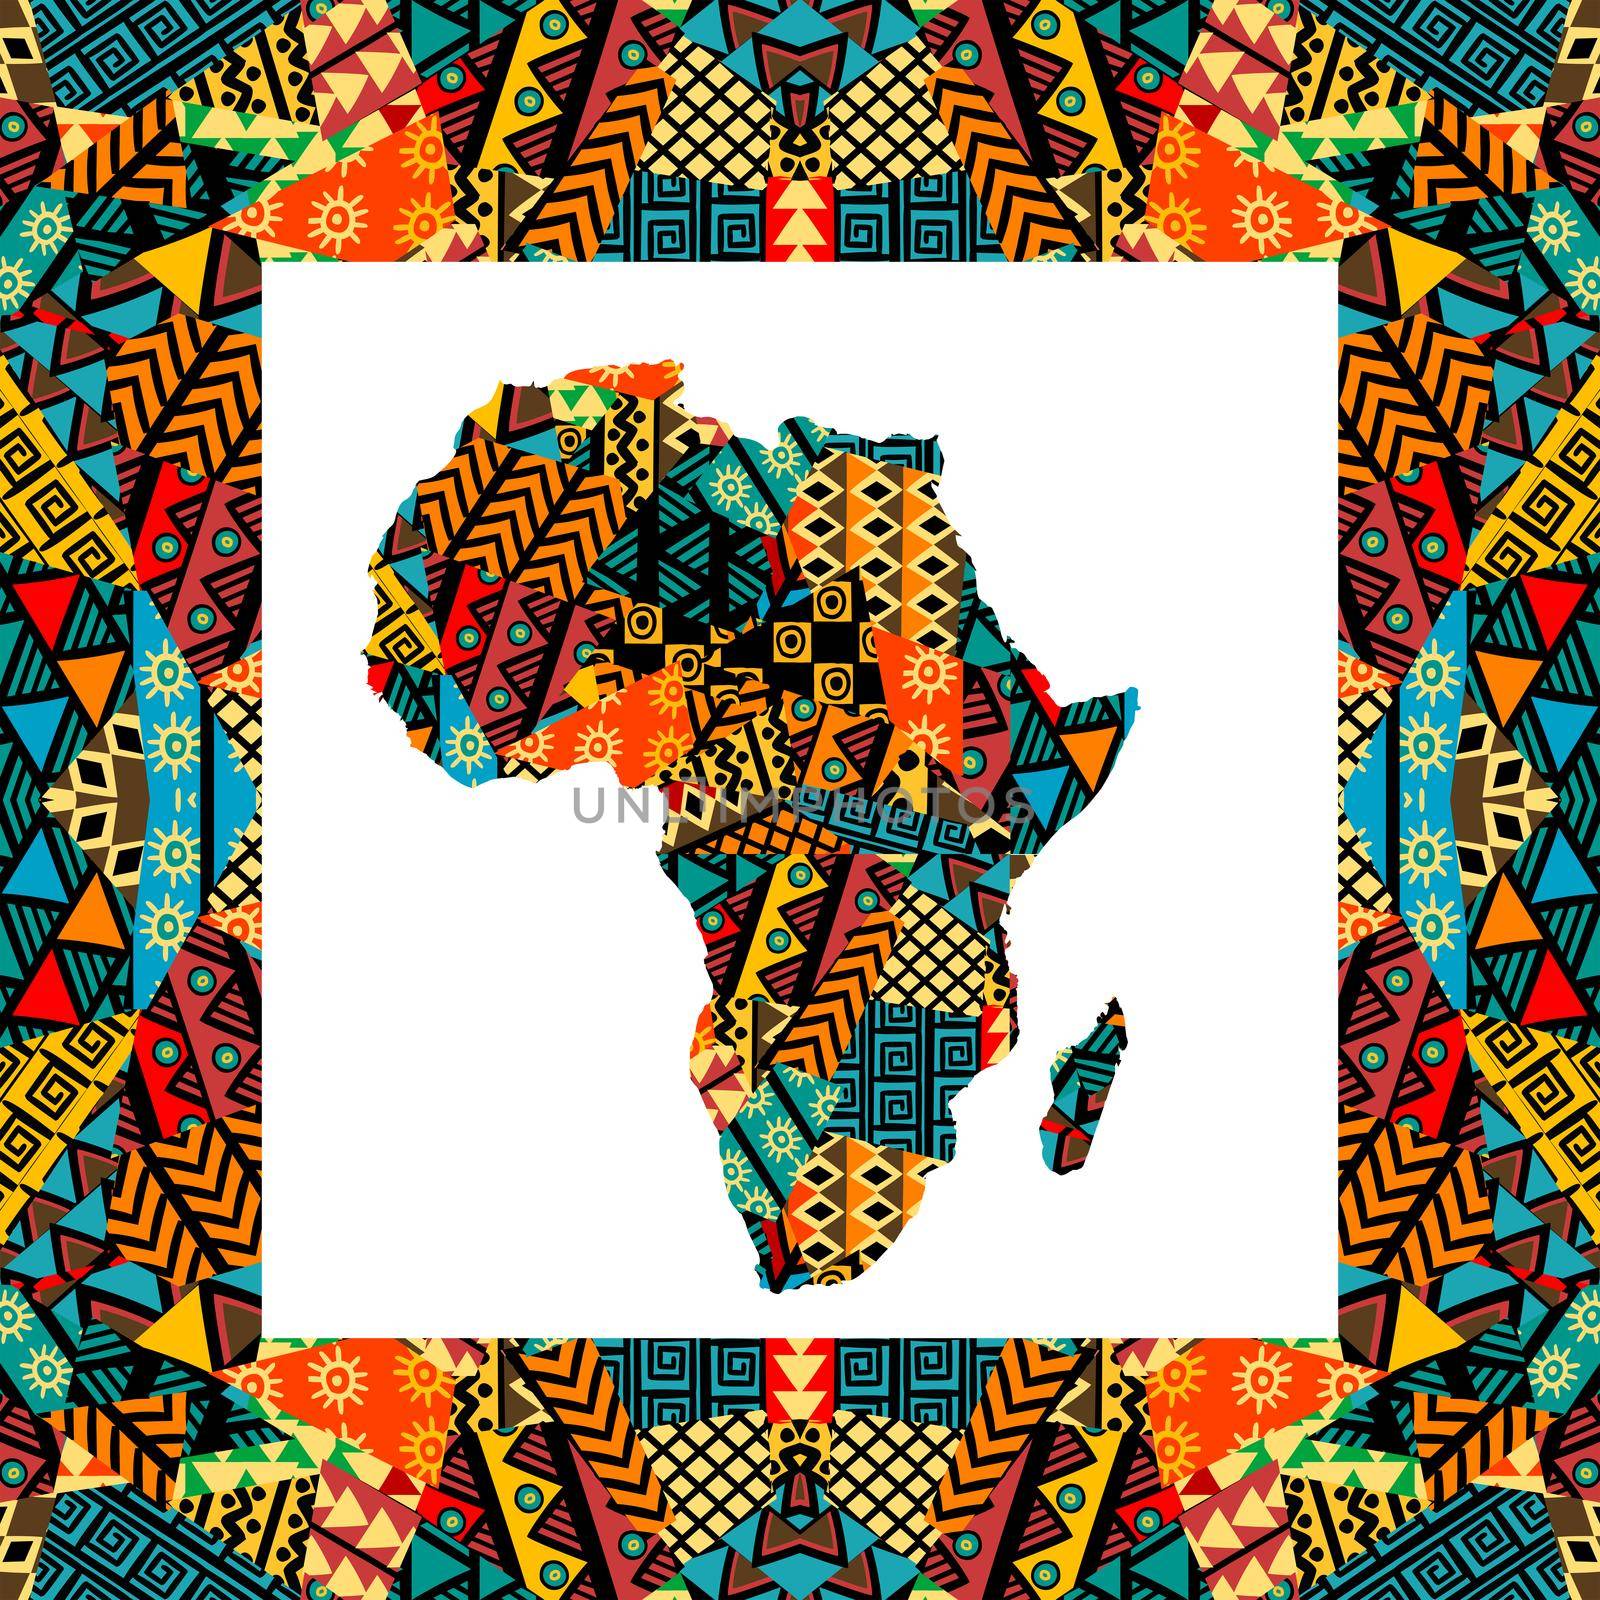 Africa map and frame with ethnic motifs by hibrida13